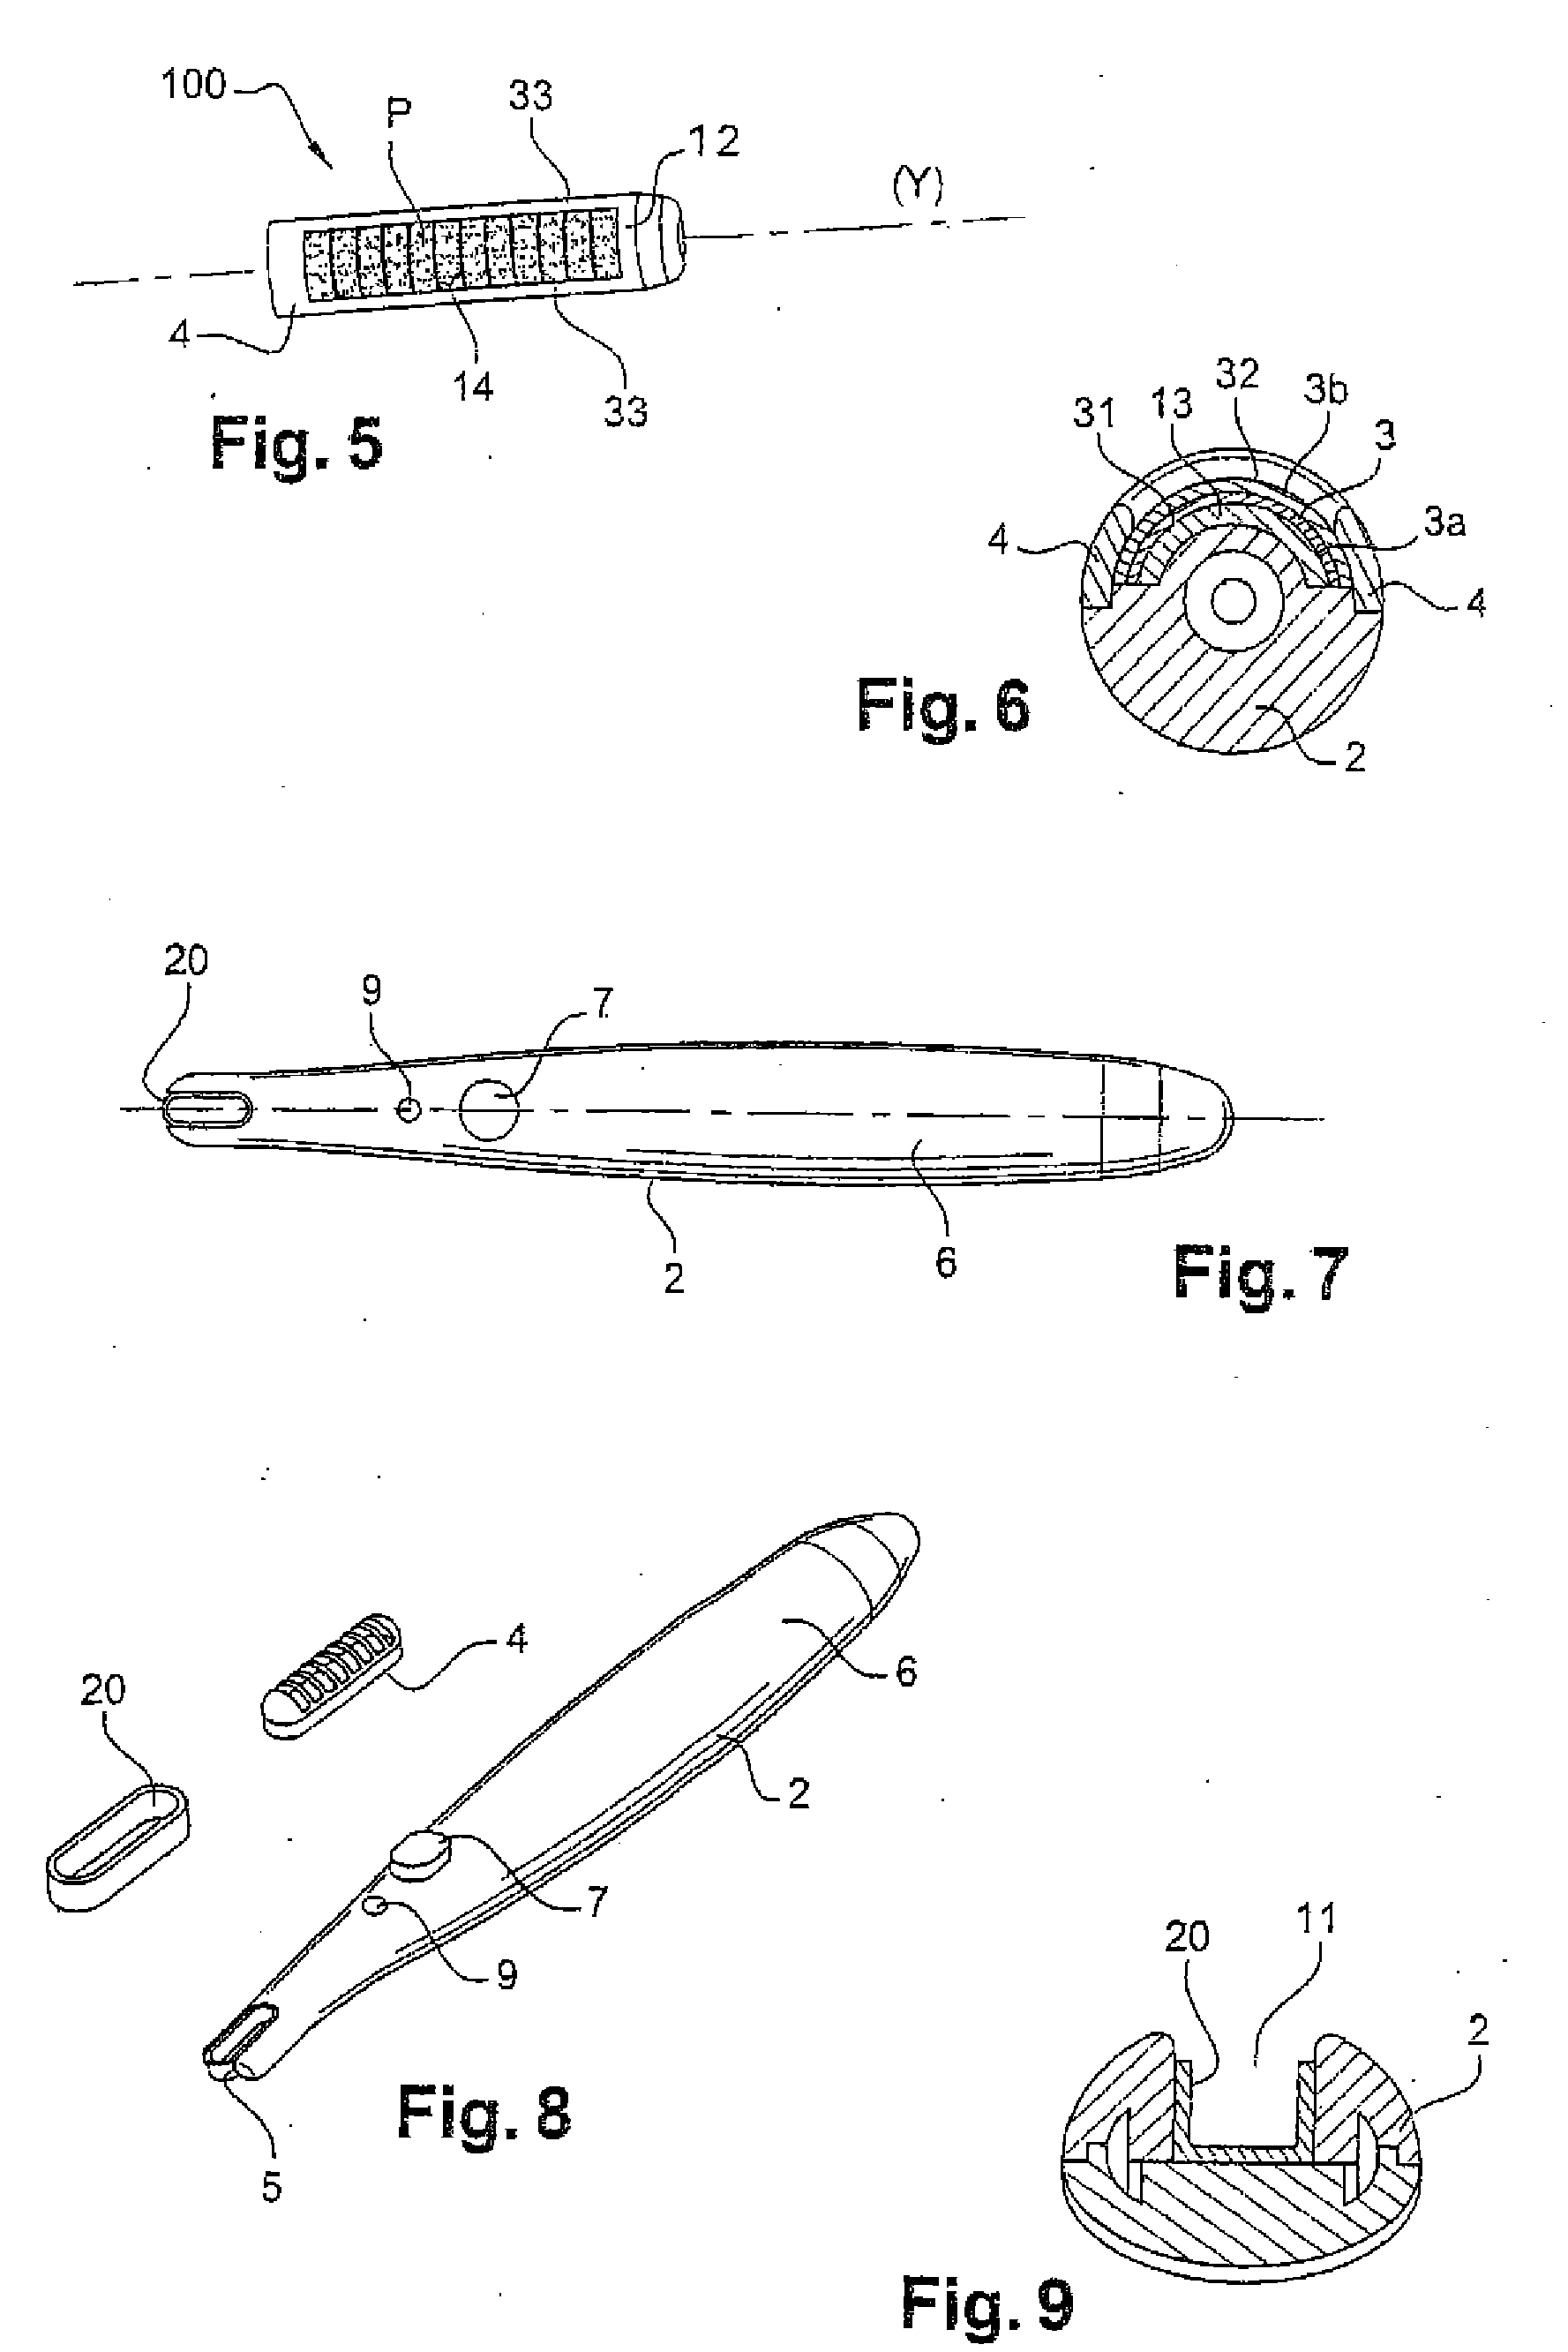 Applicator for applying a cosmetic composition to human keratinous materials